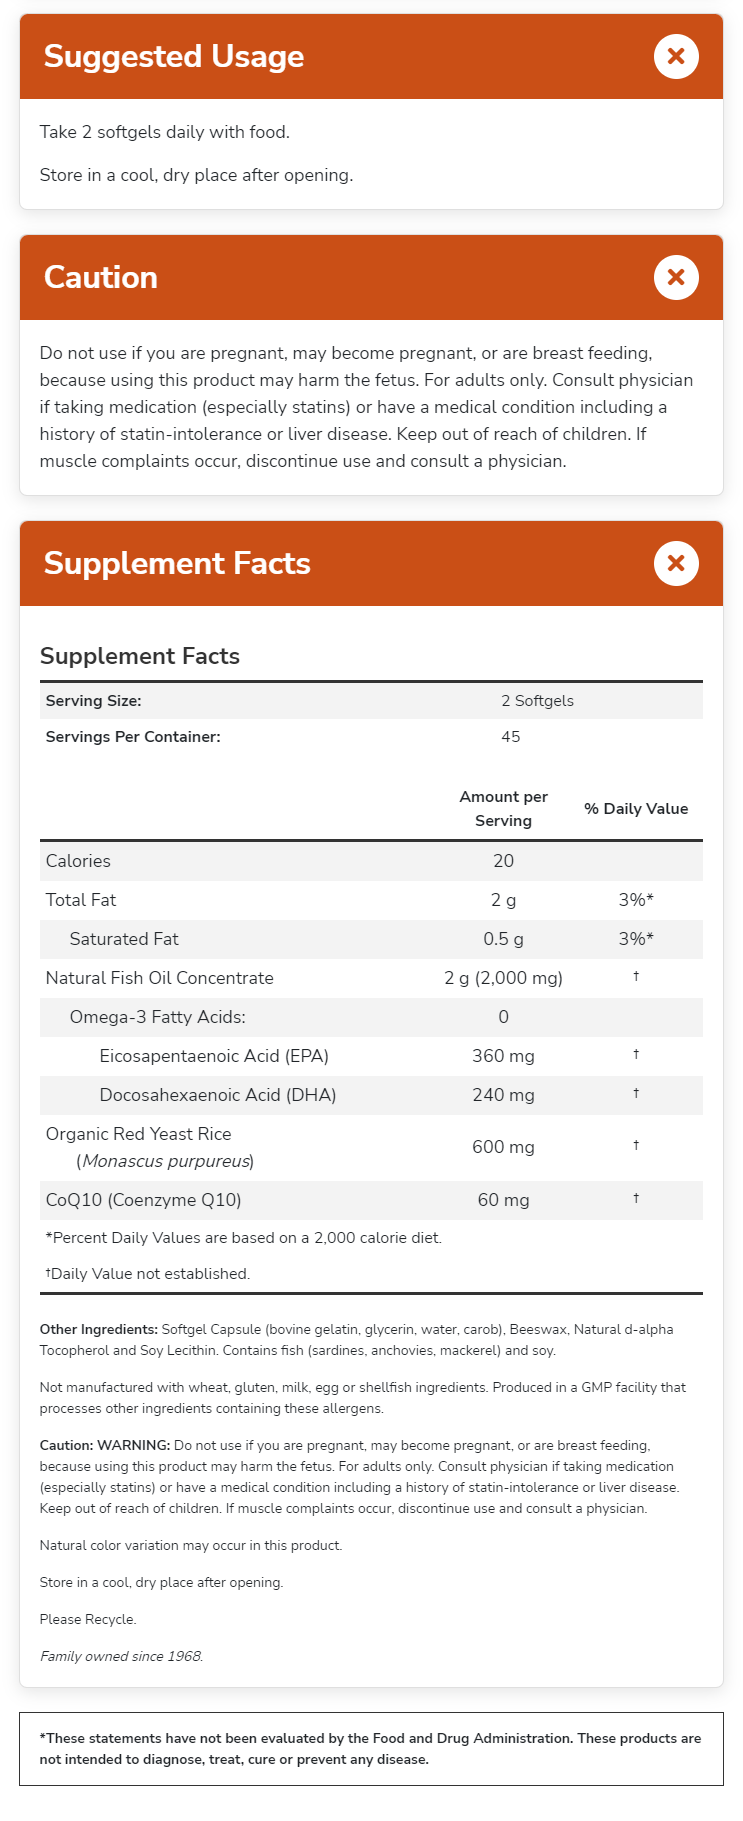 Supplement facts and usage instructions for softgel capsules containing Fish Oil, Omega-3, Red Yeast Rice and CoQ10. Not suitable for pregnant women.